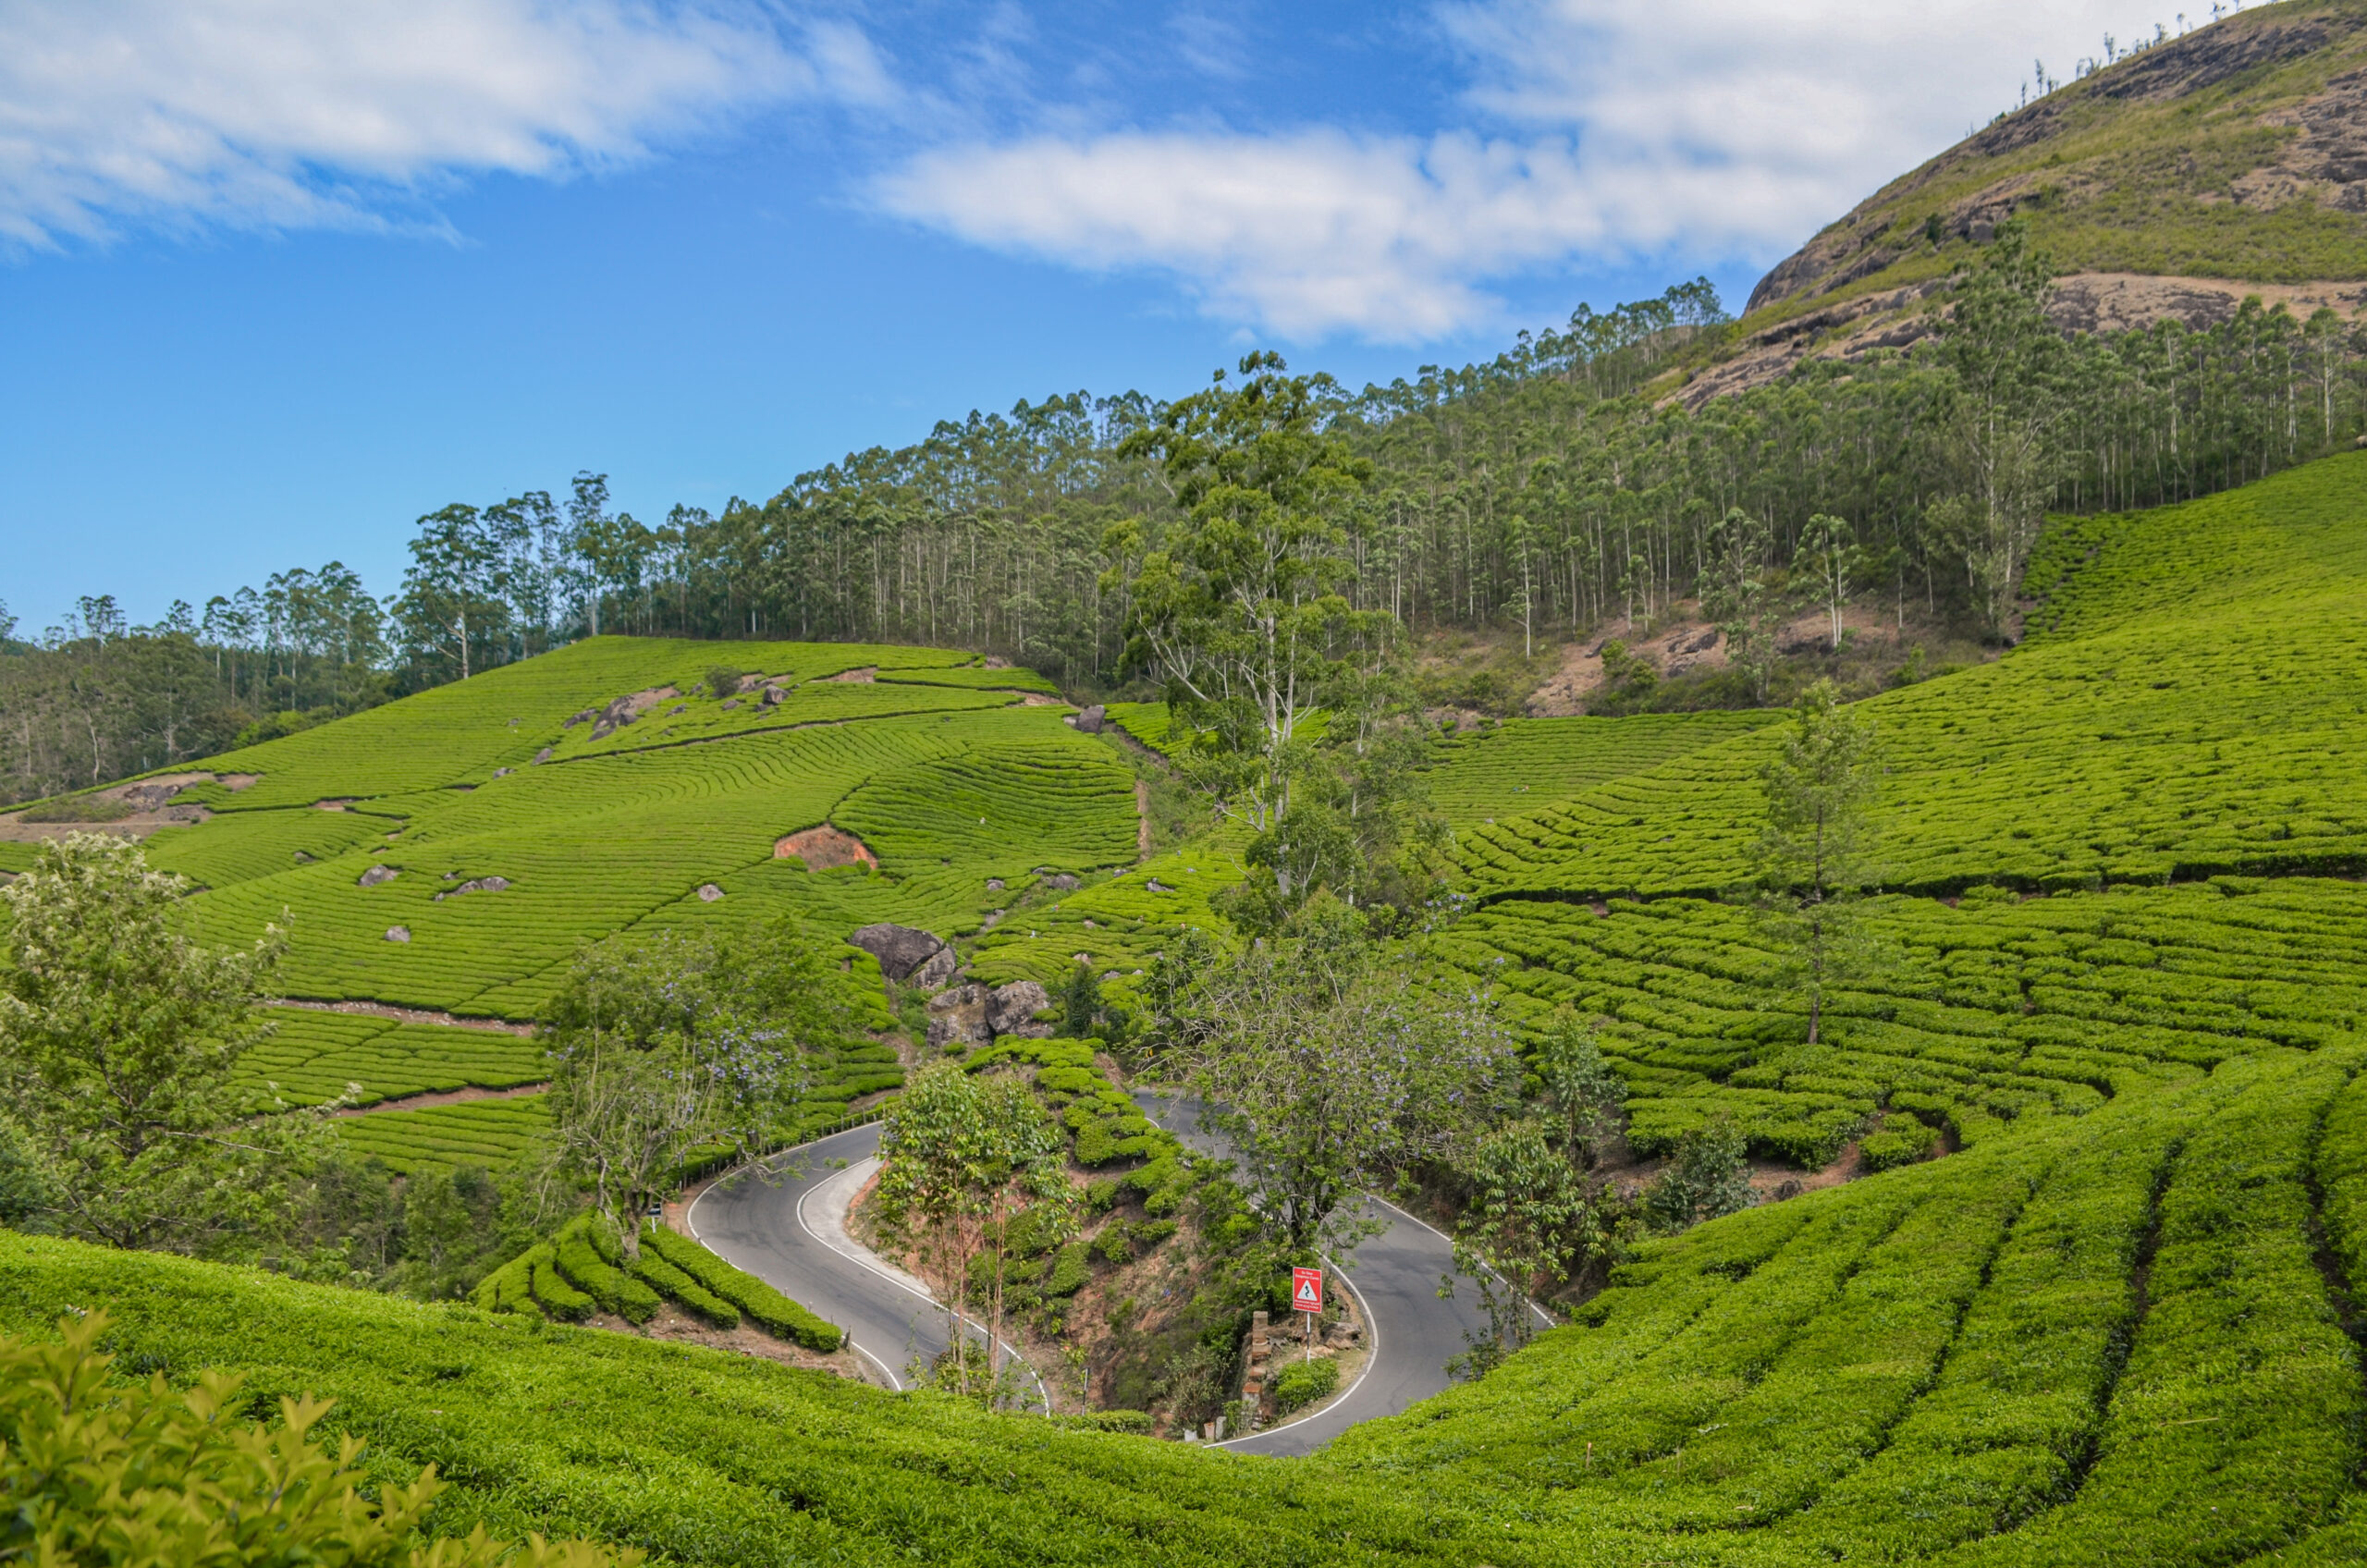 Munnar – A Complete Travel Guide